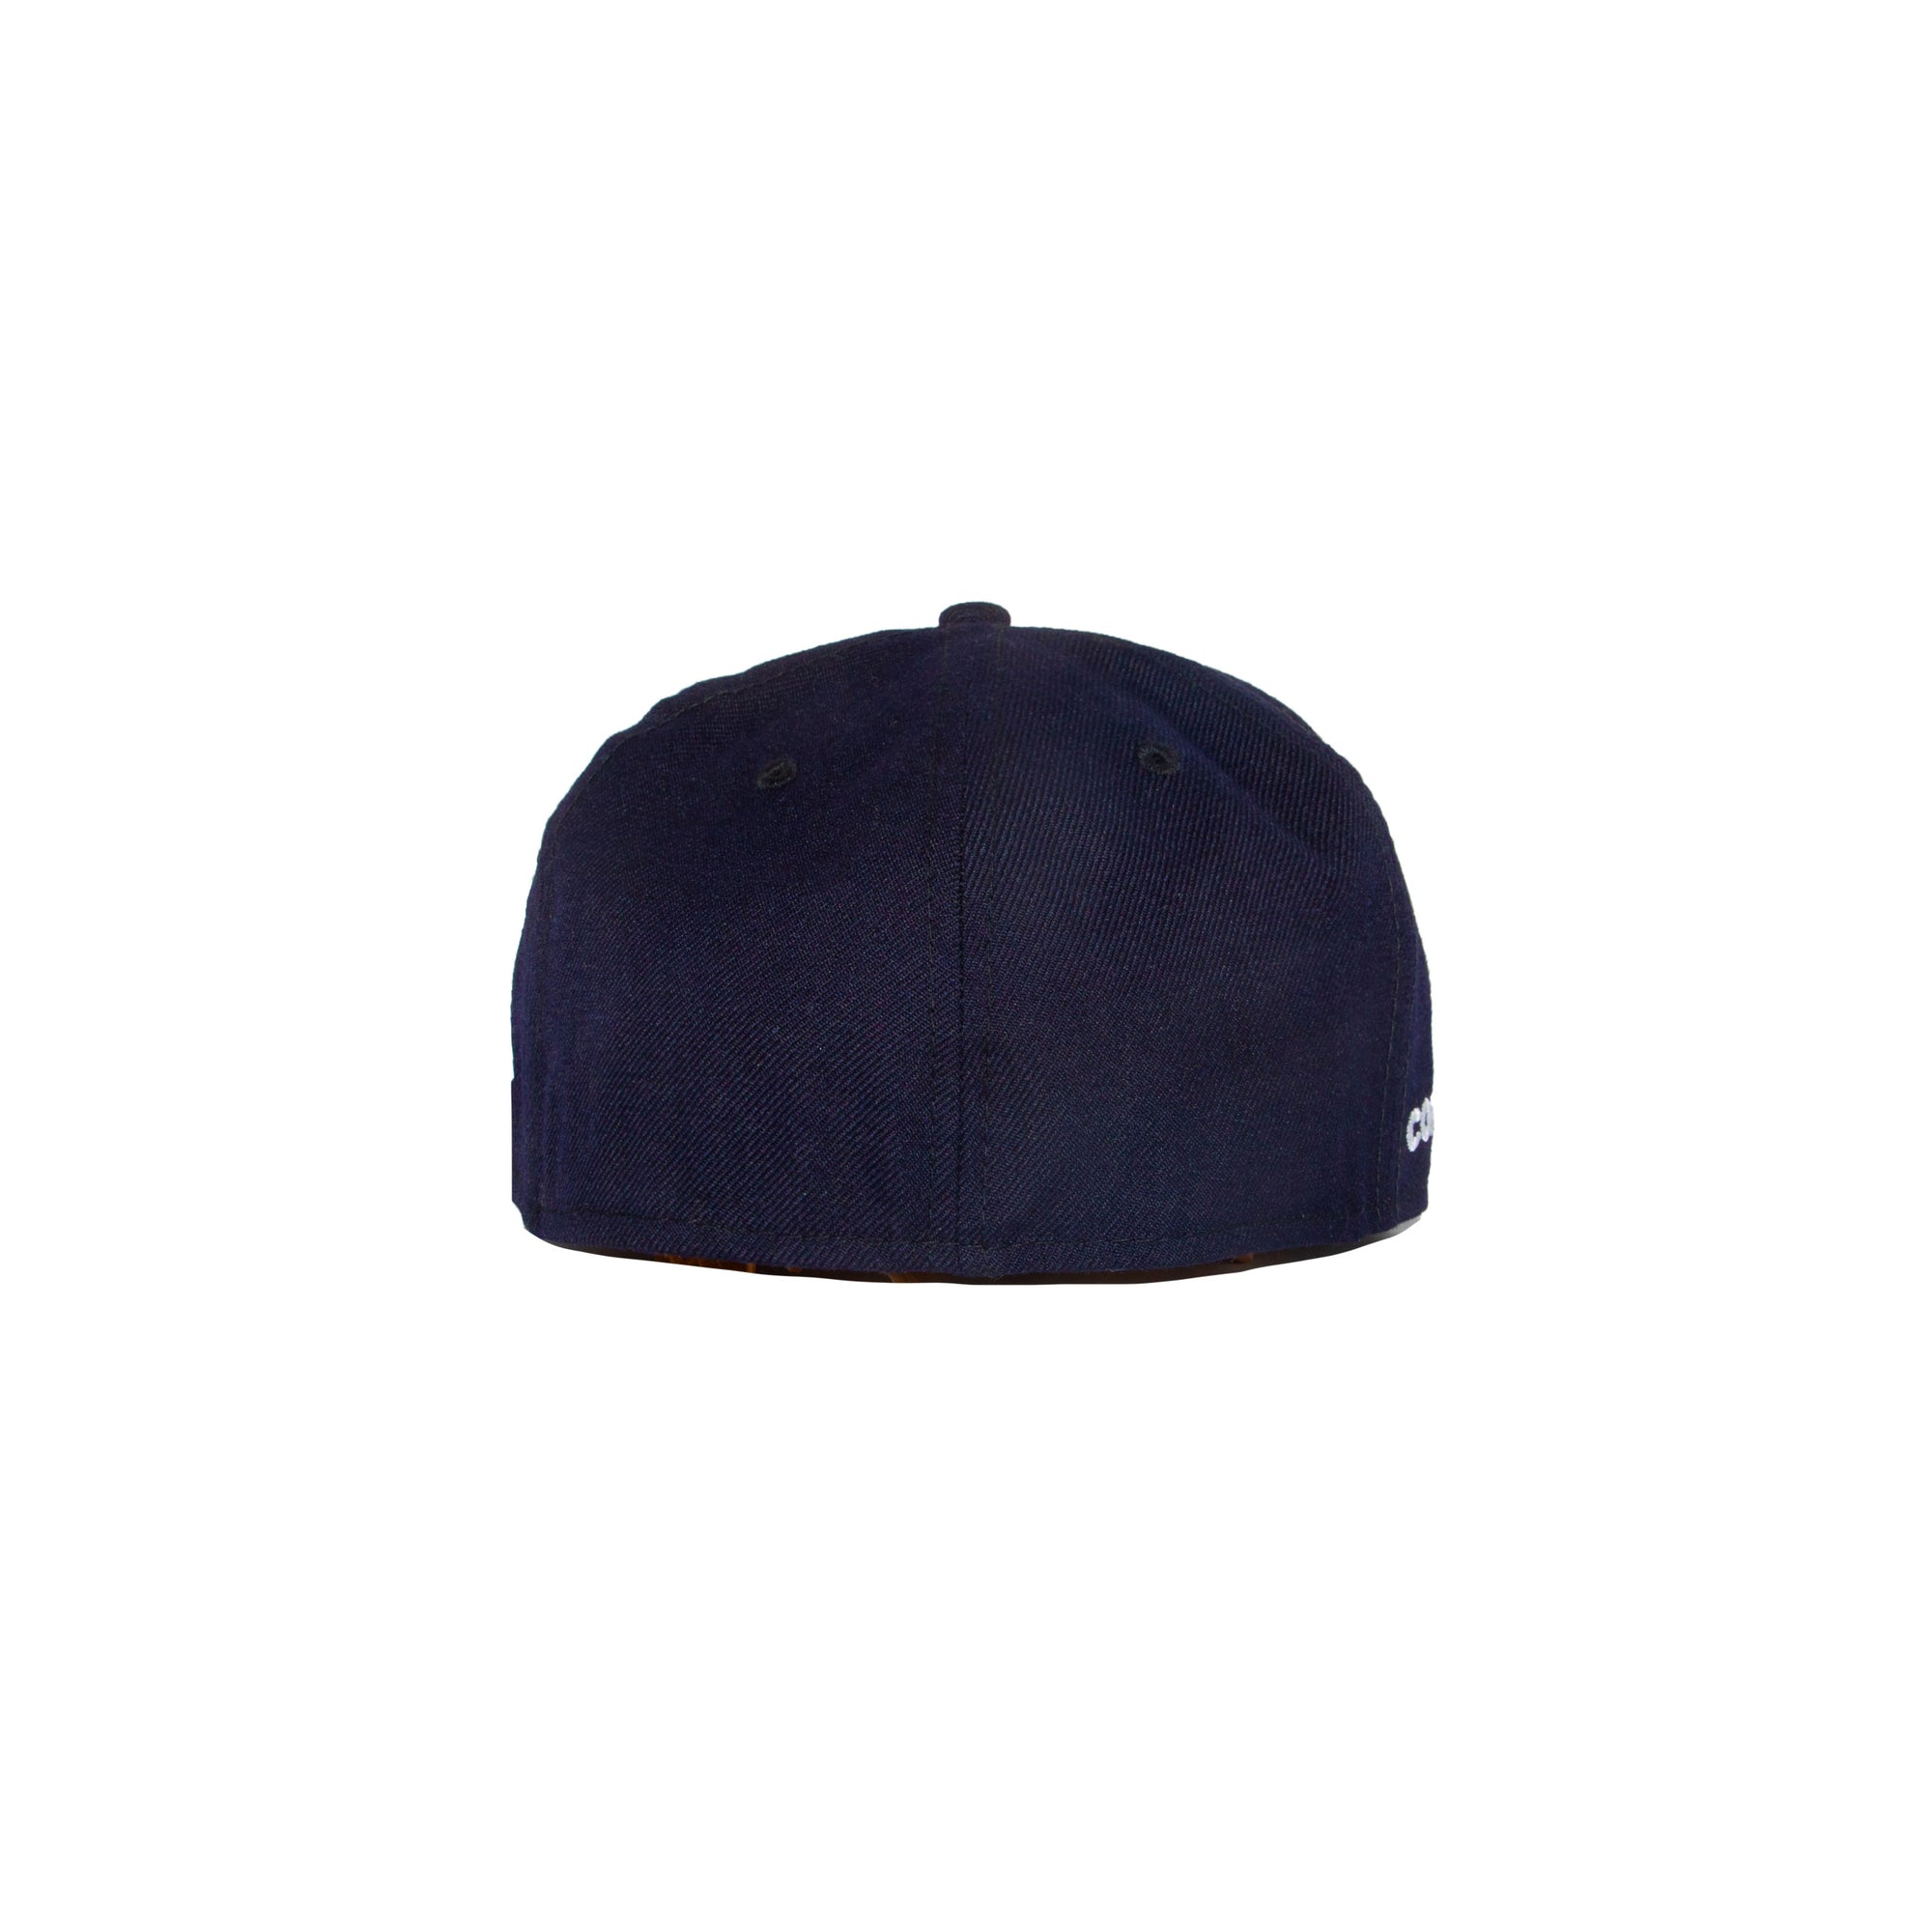 NAVY '7' FITTED